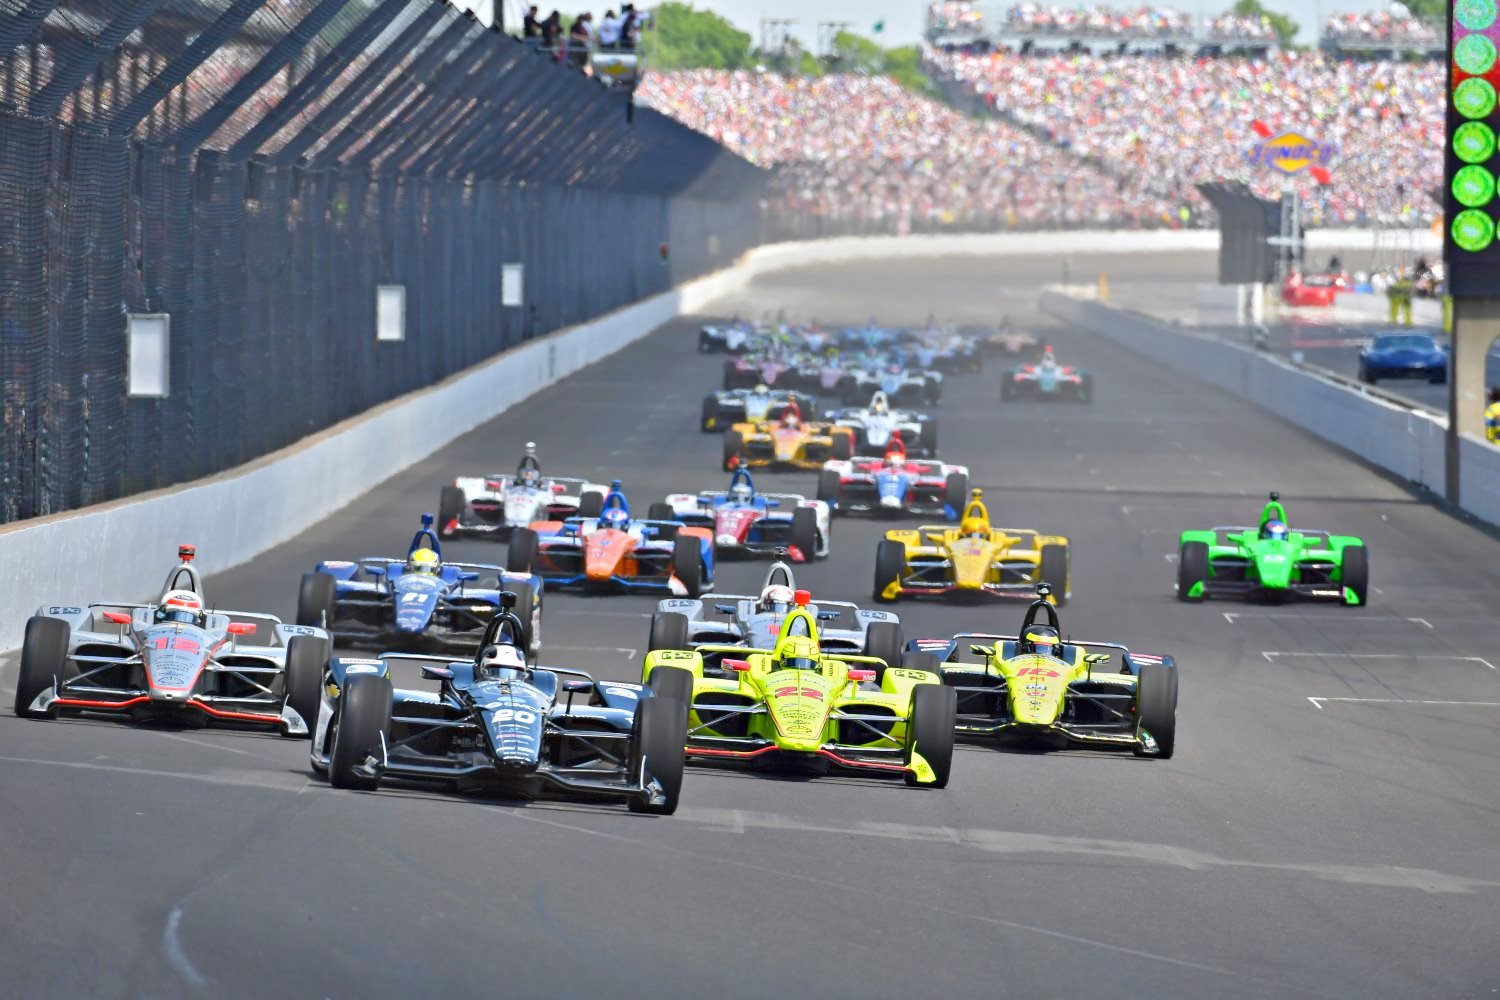 The only thing stopping IndyCar from booming is its horrible domestic TV package and non-existent international TV deals